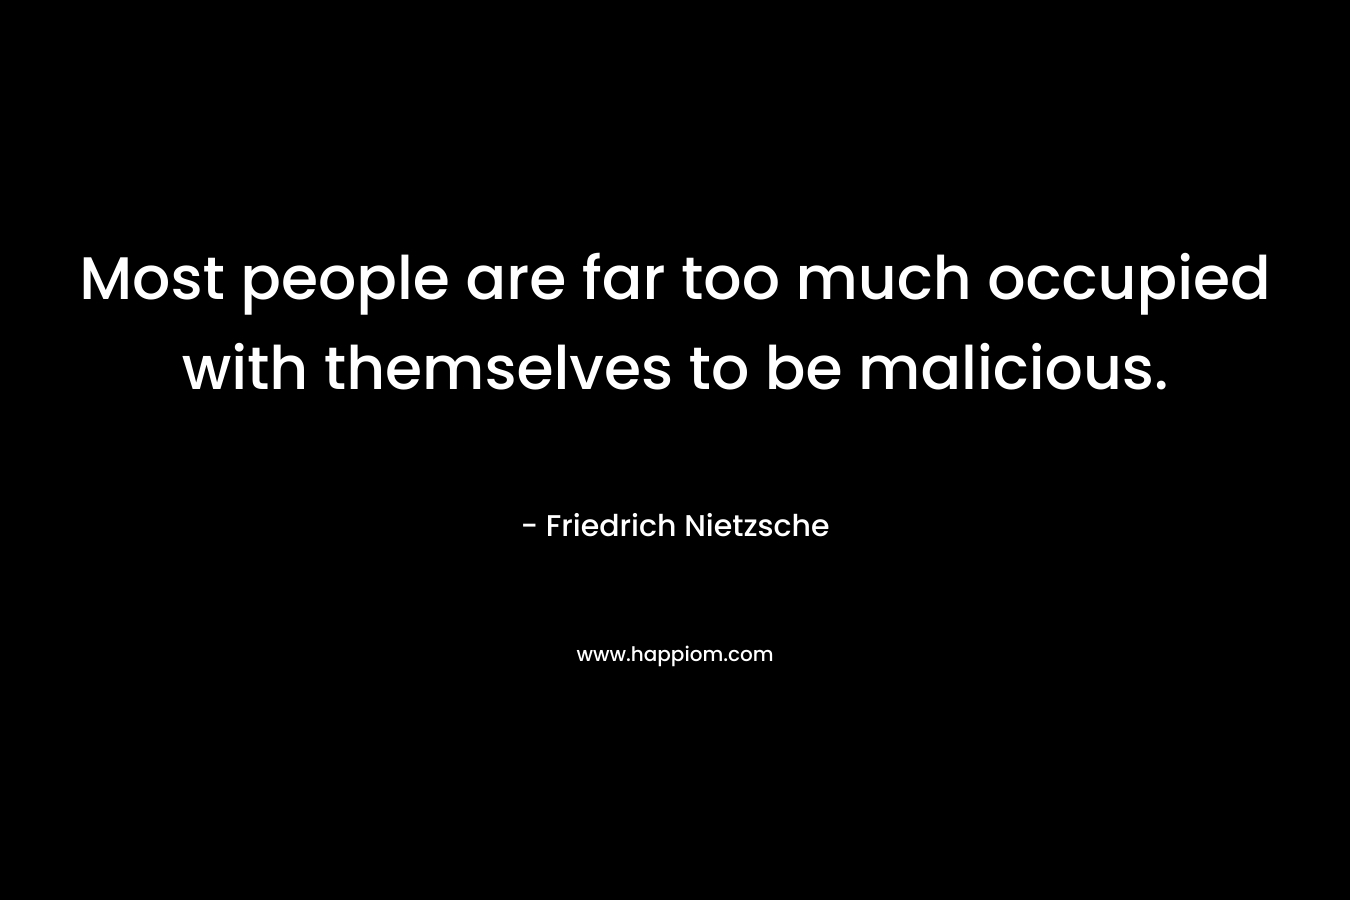 Most people are far too much occupied with themselves to be malicious.